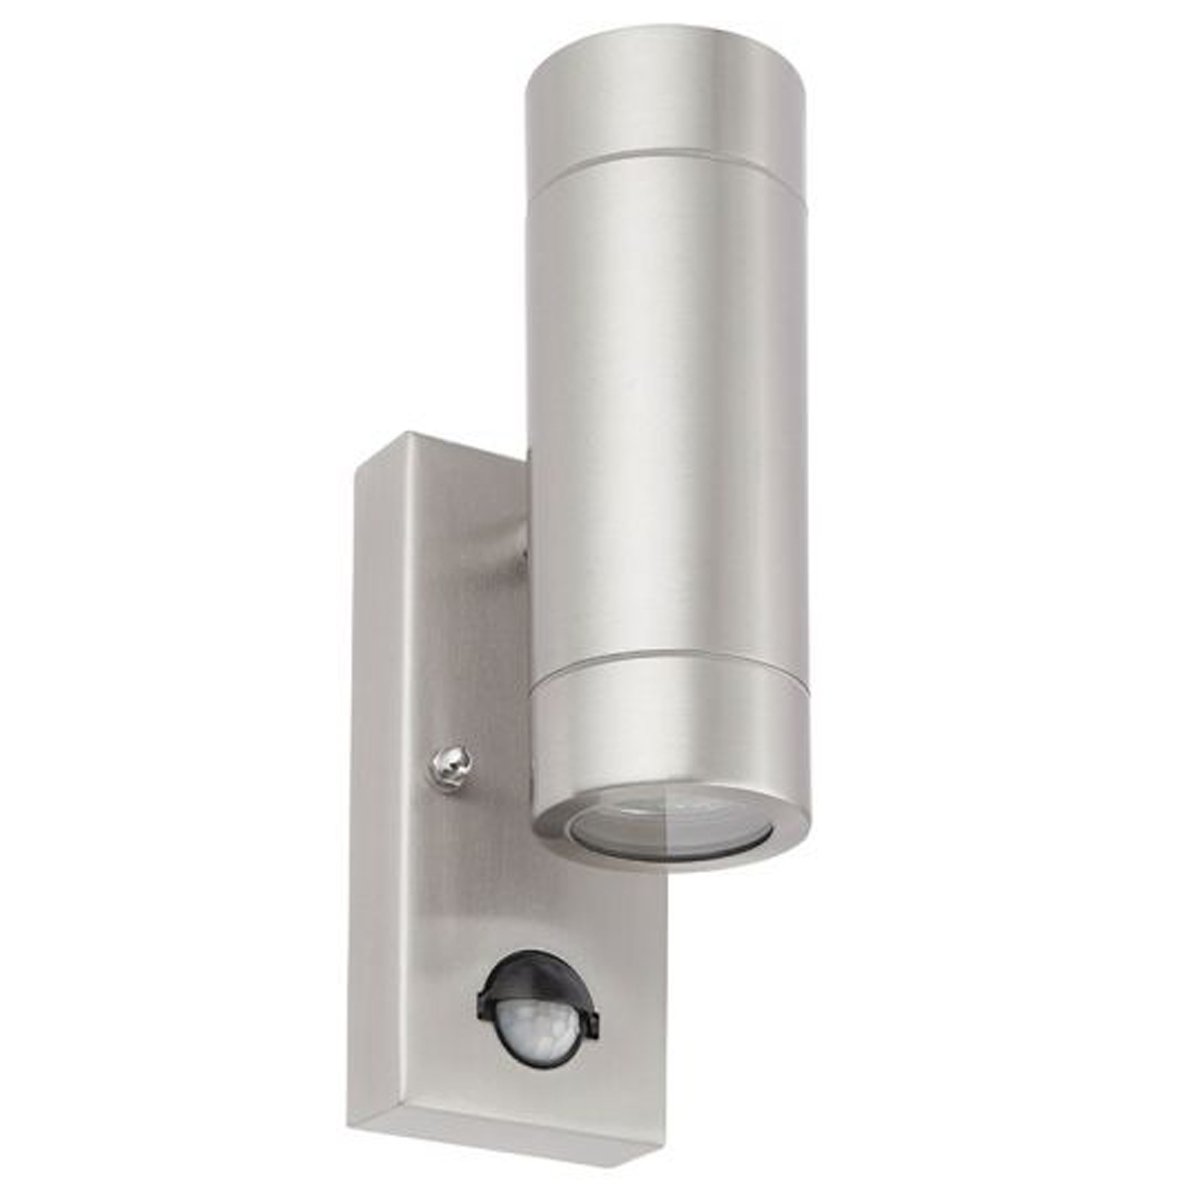 CGC SONIA Stainless Steel Double Outdoor Light With Motion Sensor